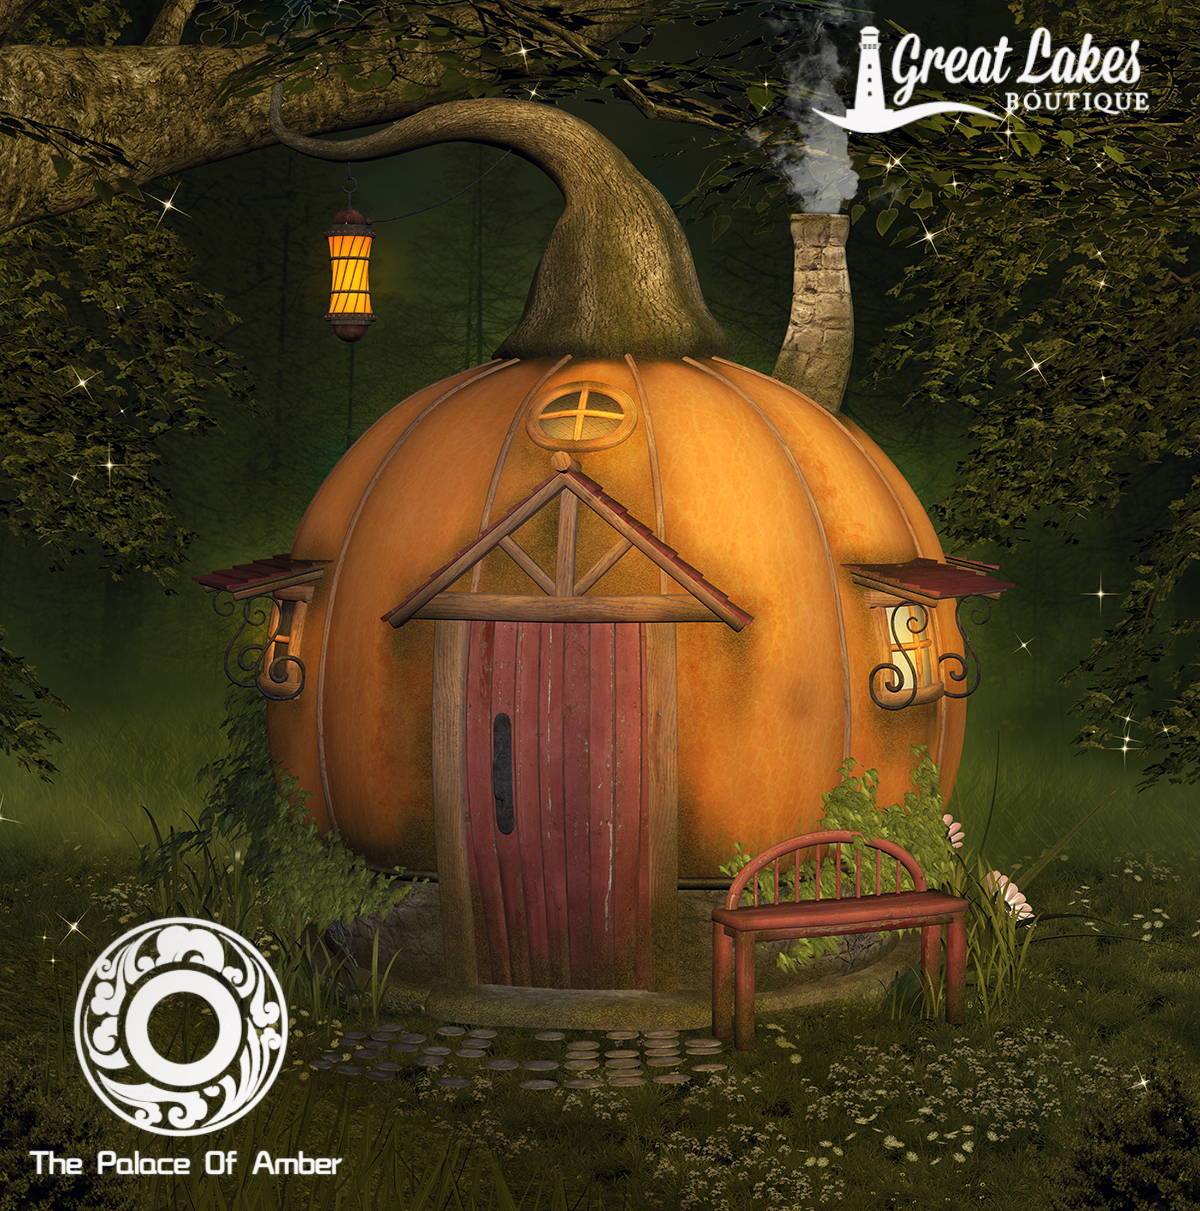 The Palace of Amber Pumpkin Cottage Preview and Launch Details